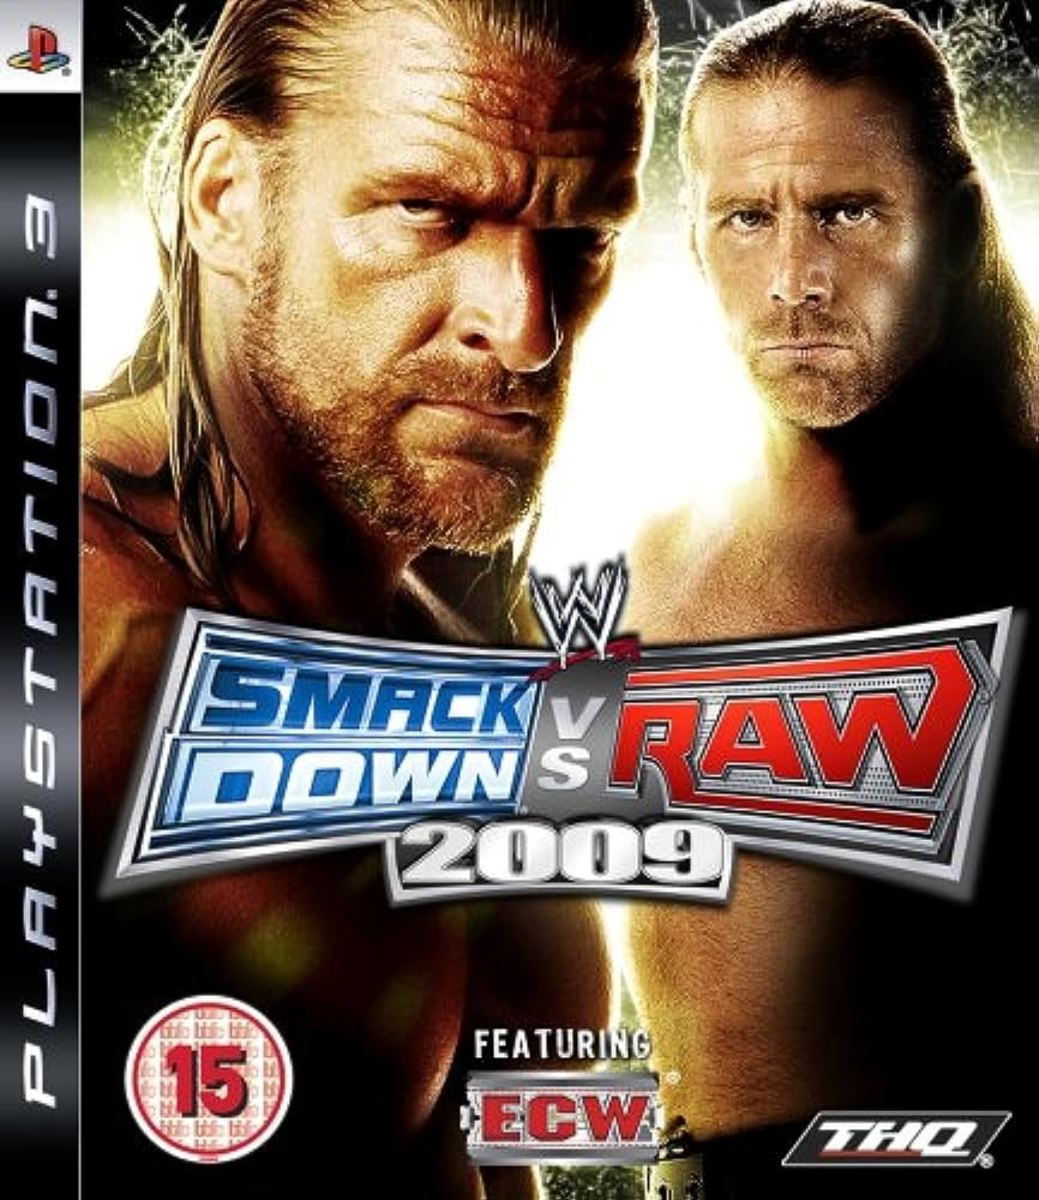 WWE Smackdown vs Raw 2009 cover